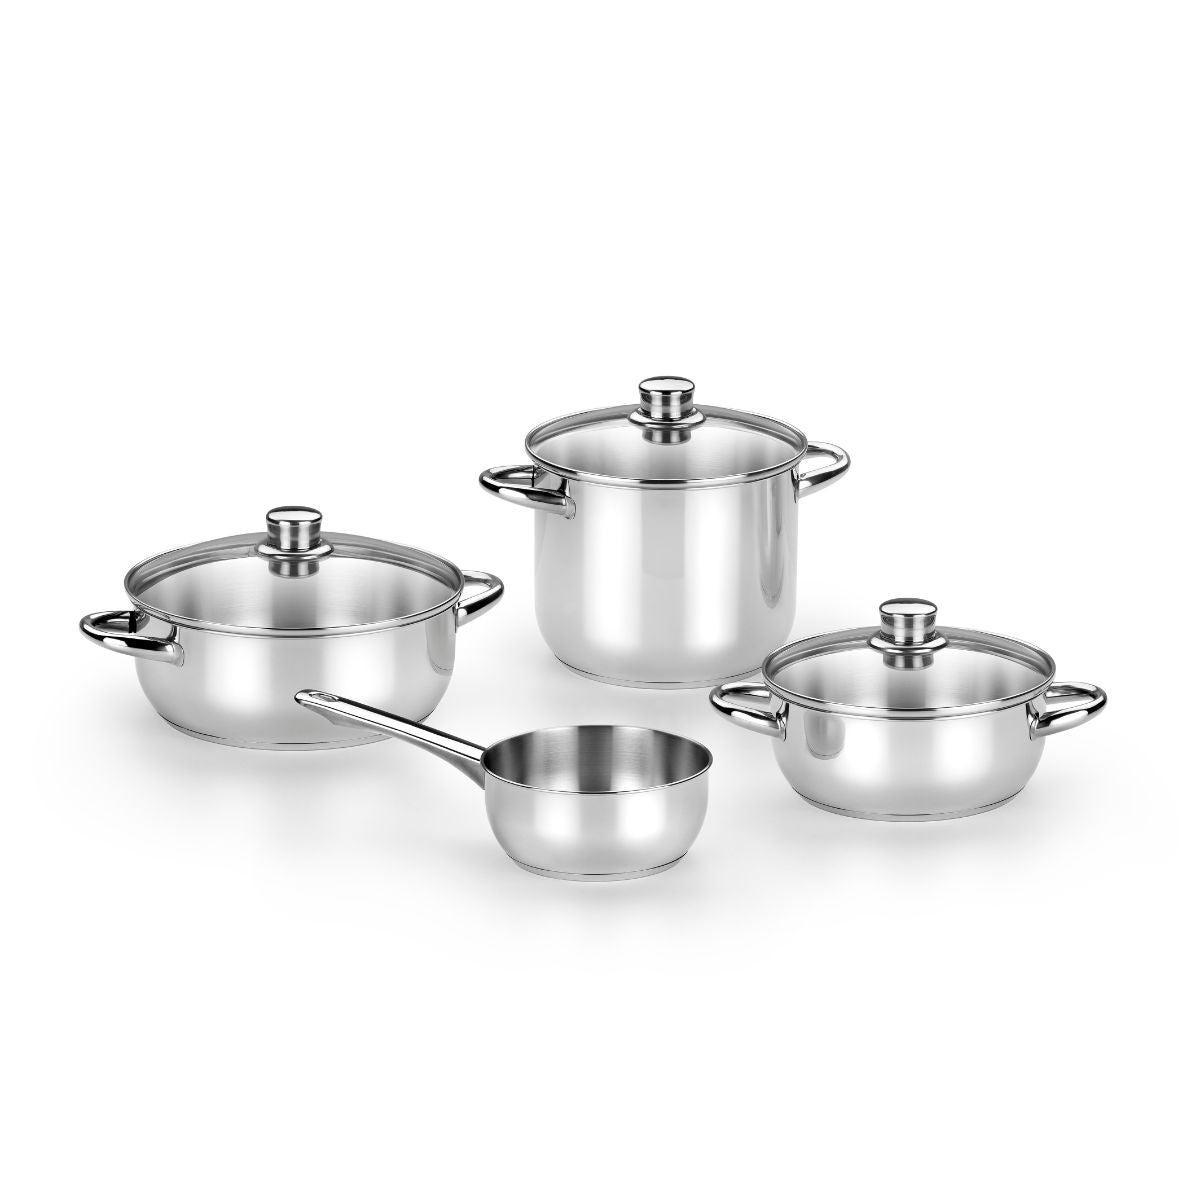 Optima 7-piece Cookware Set with Glass Lid